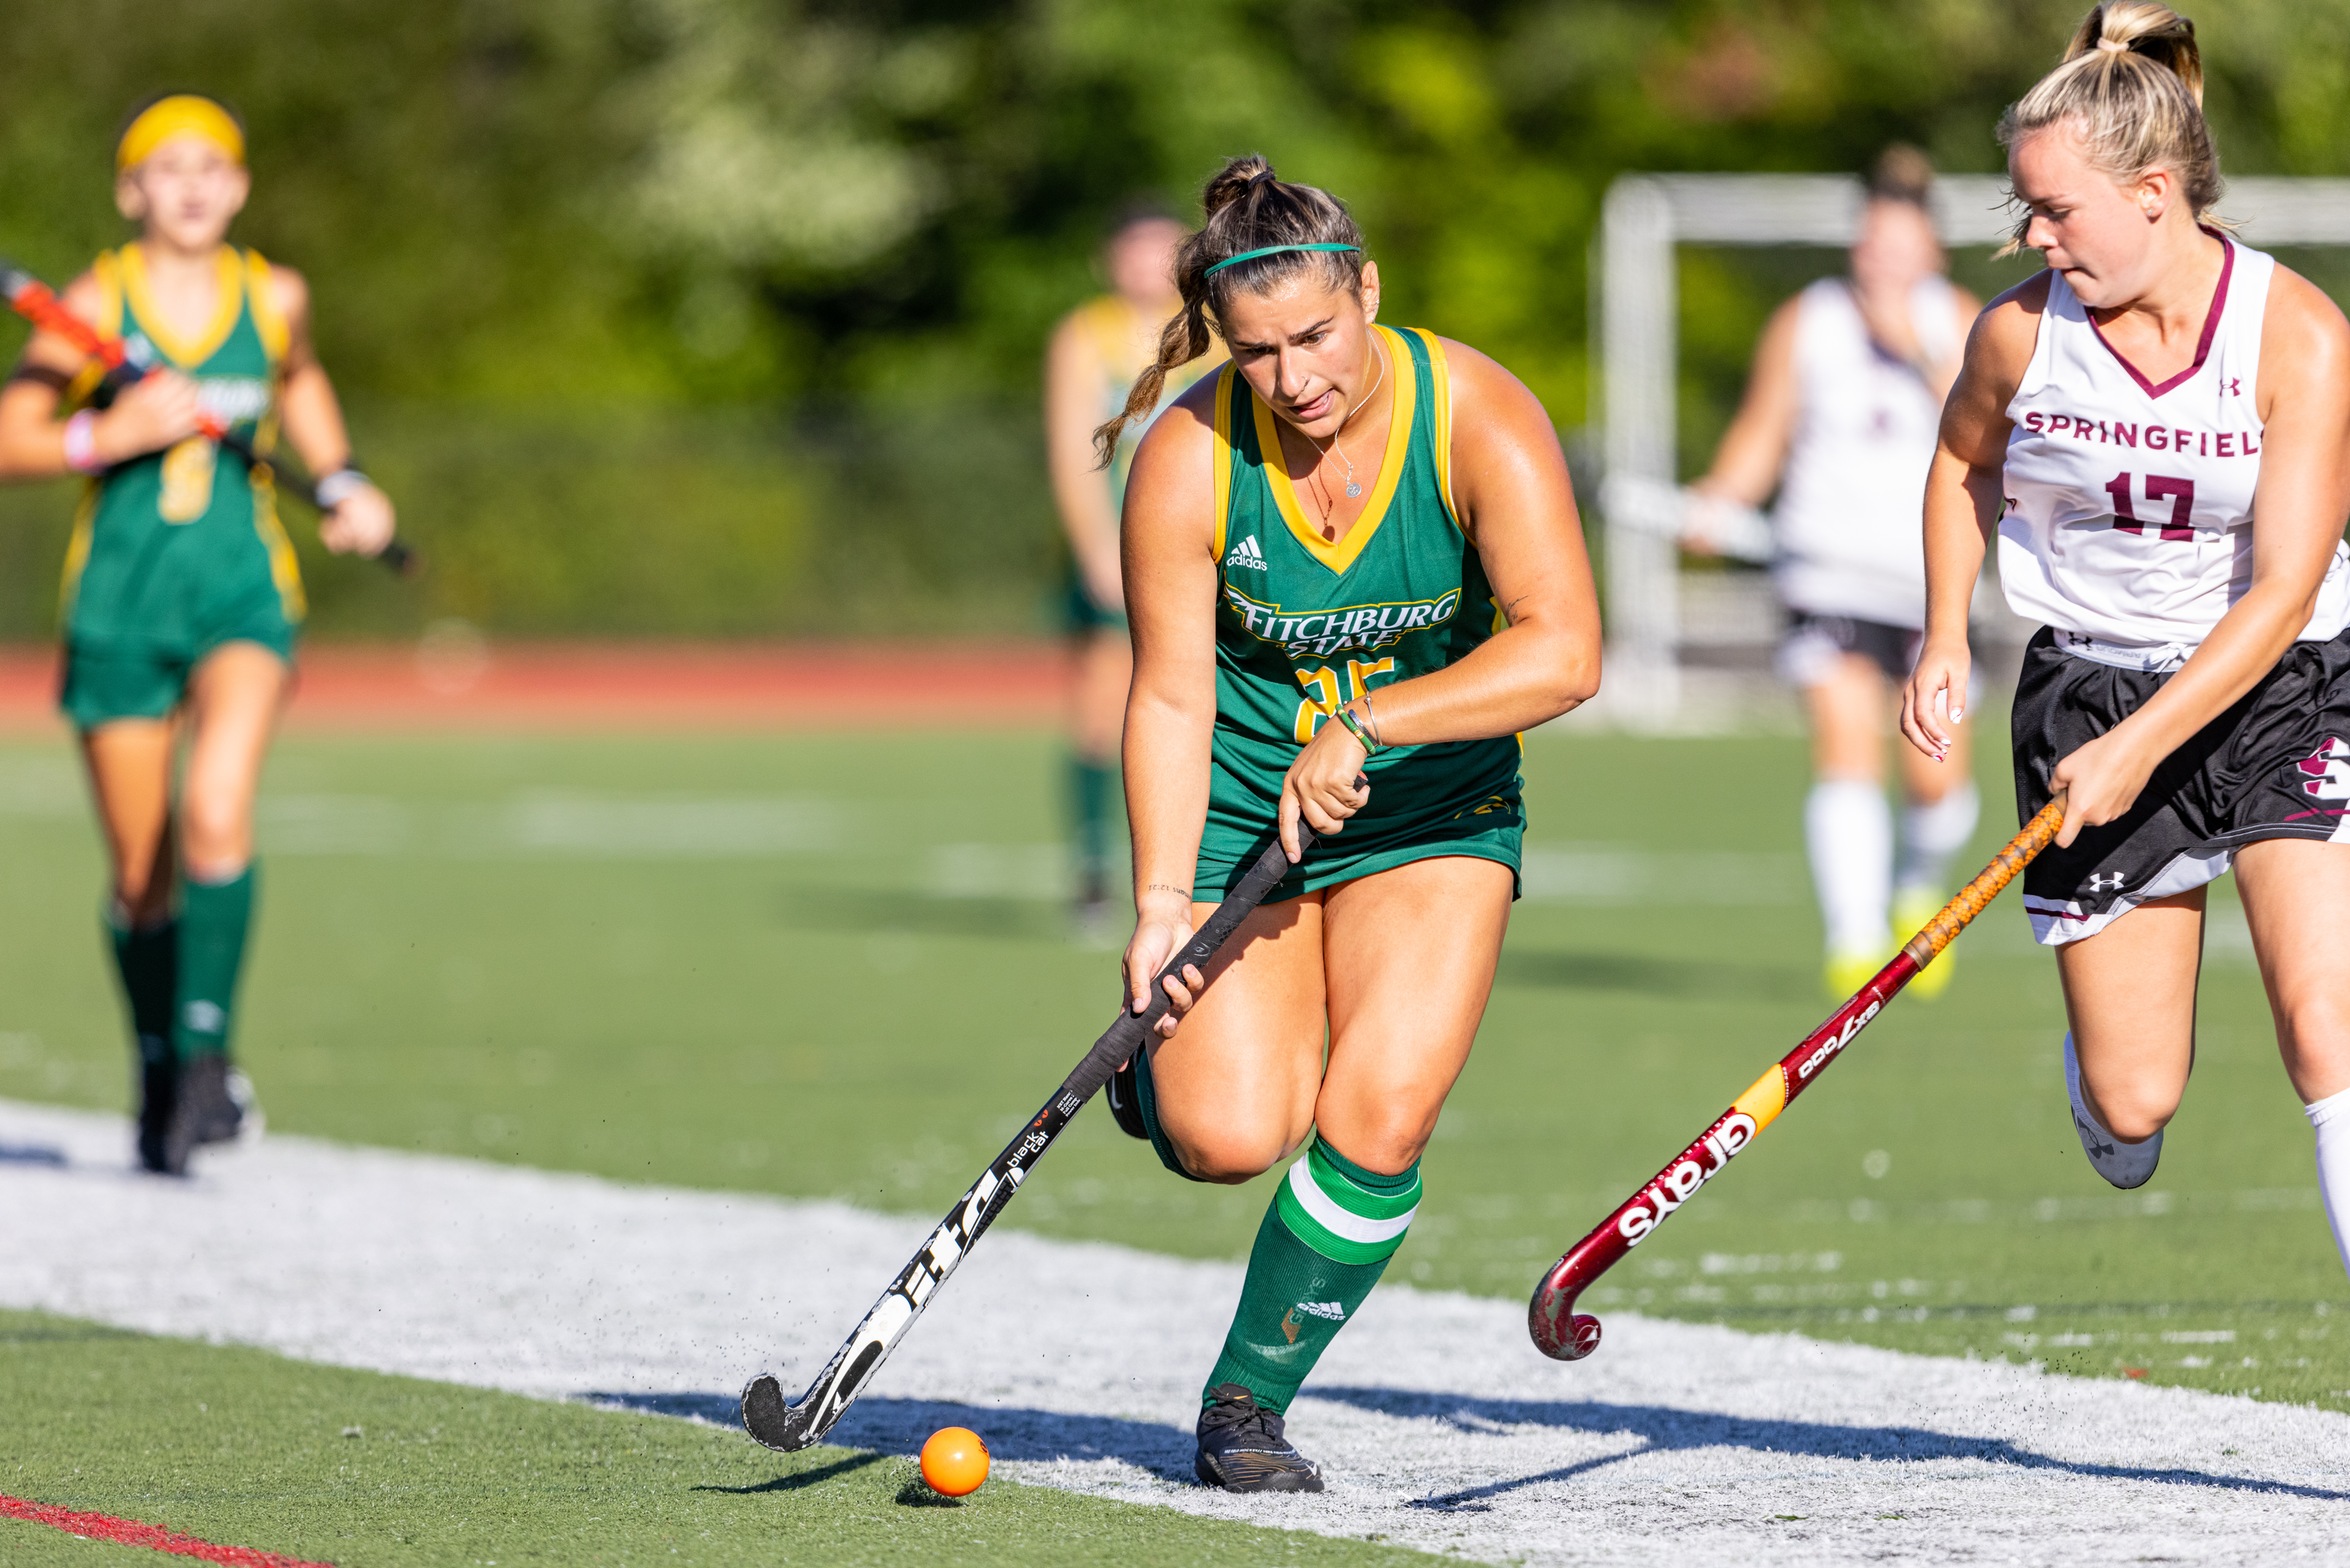 Falcons Drop 3-1 Decision To Huskies In LEC Action